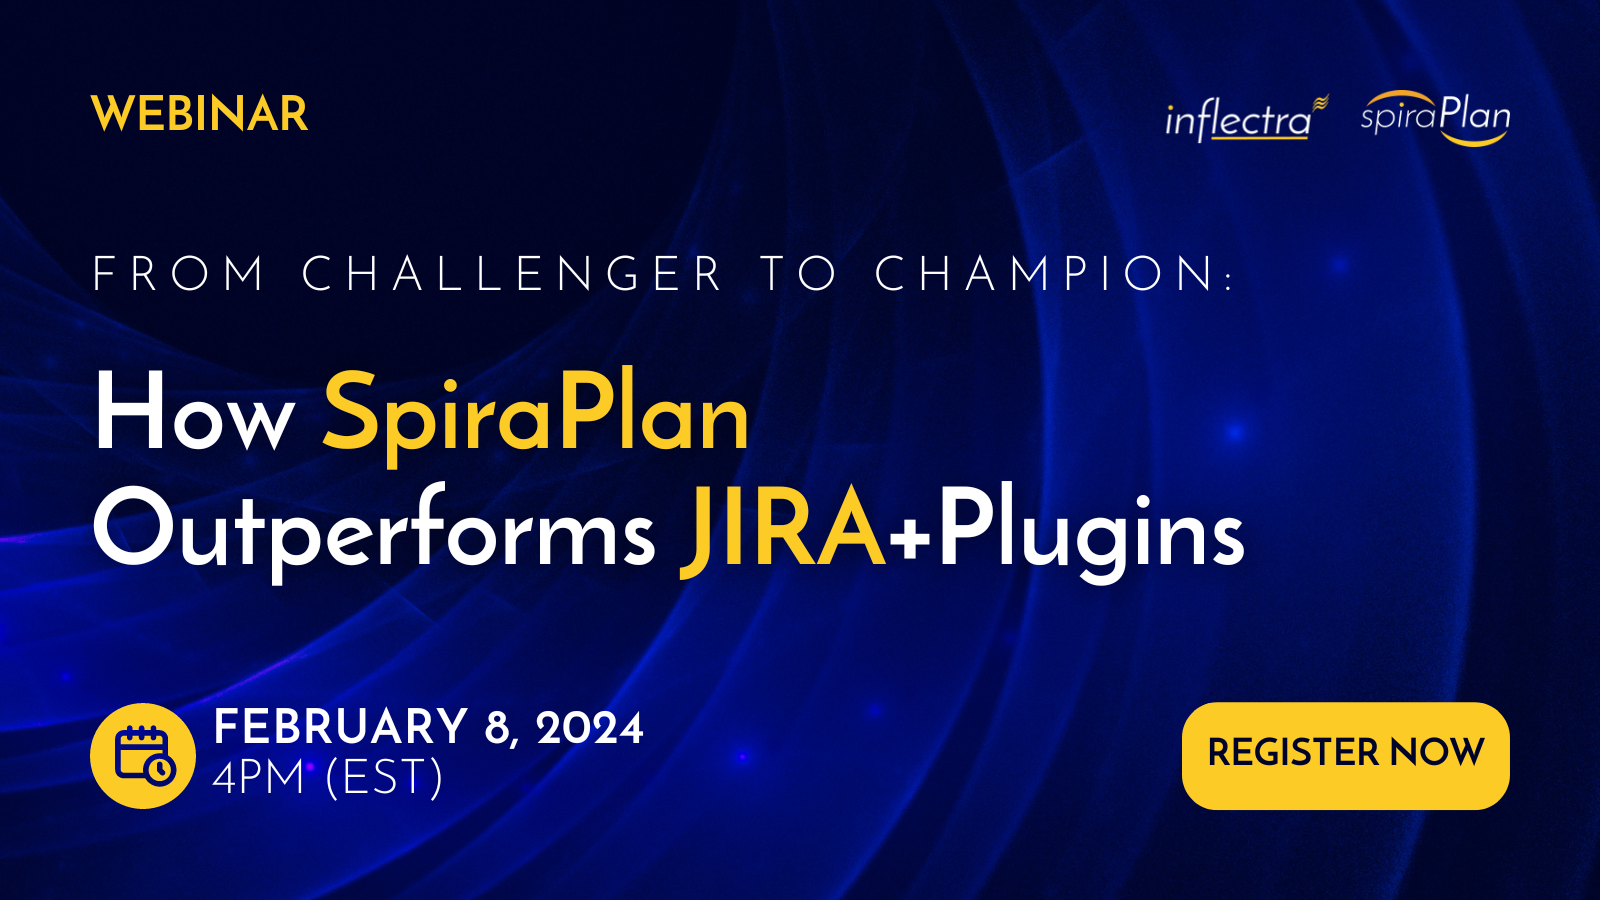 webinar-from-challenger-to-champion-how-spiraplan-out-performs-jira-plus-plugins-image